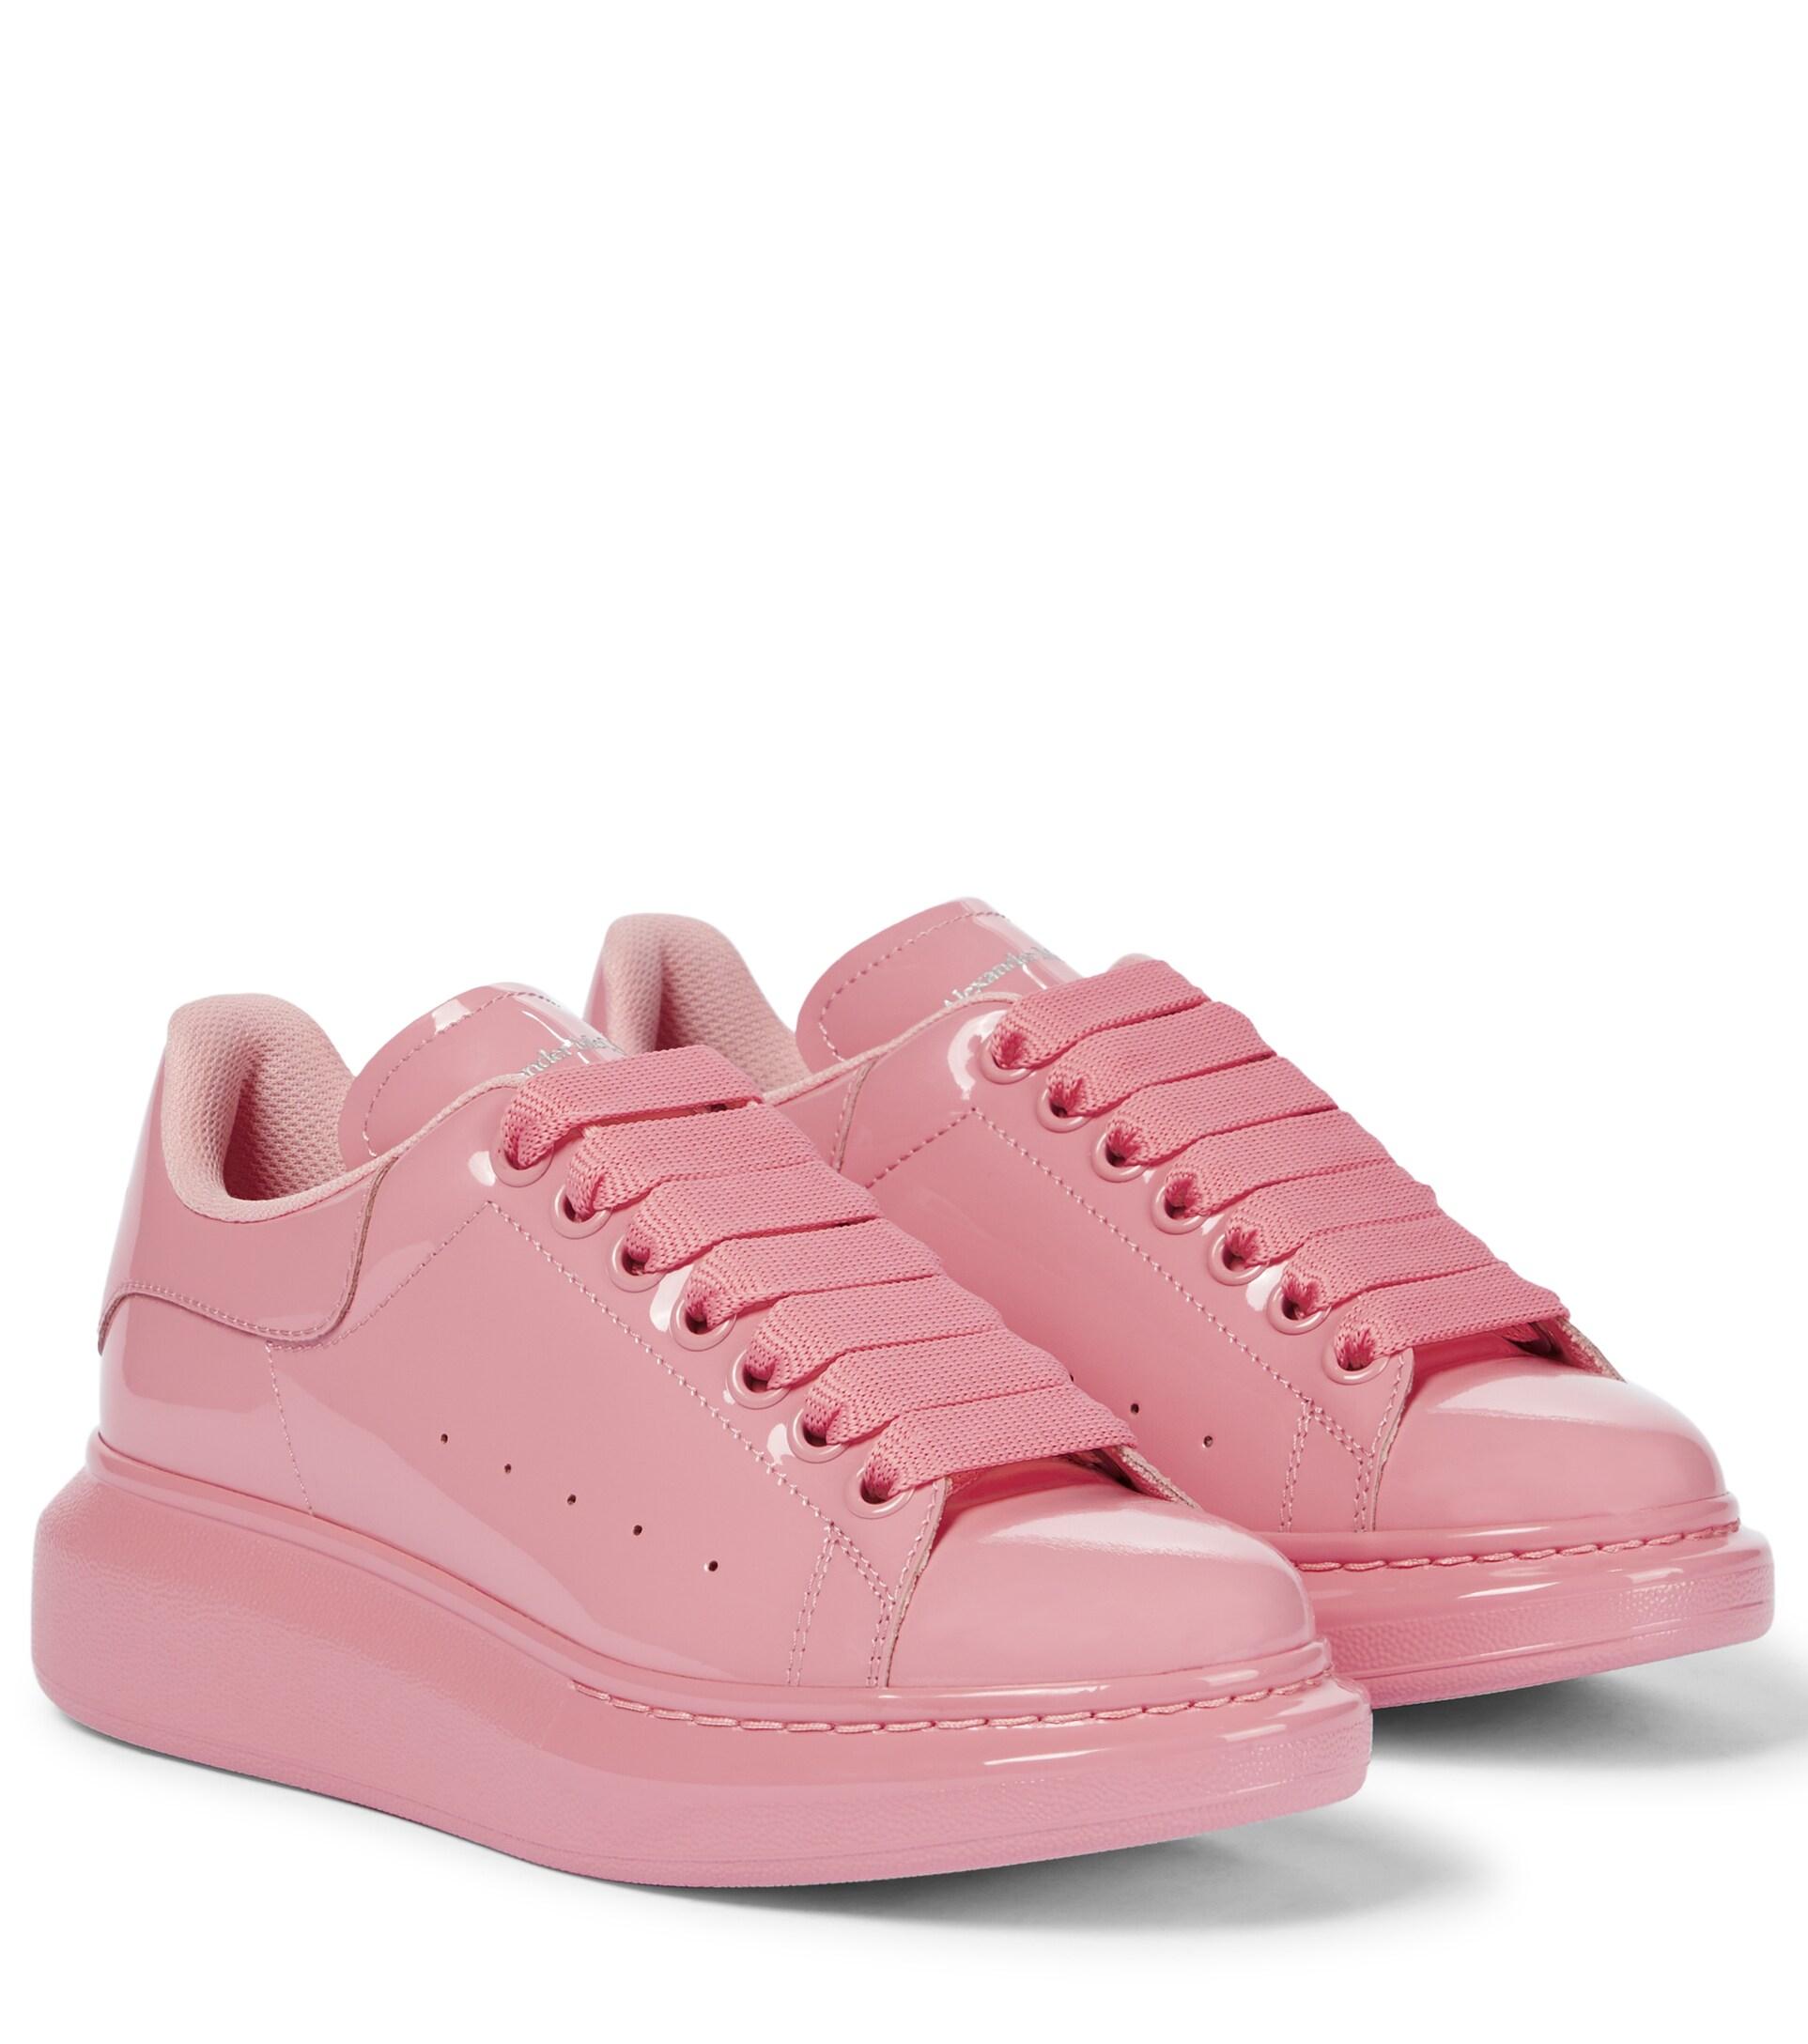 McQueen Patent Leather Sneakers in Pink | Lyst